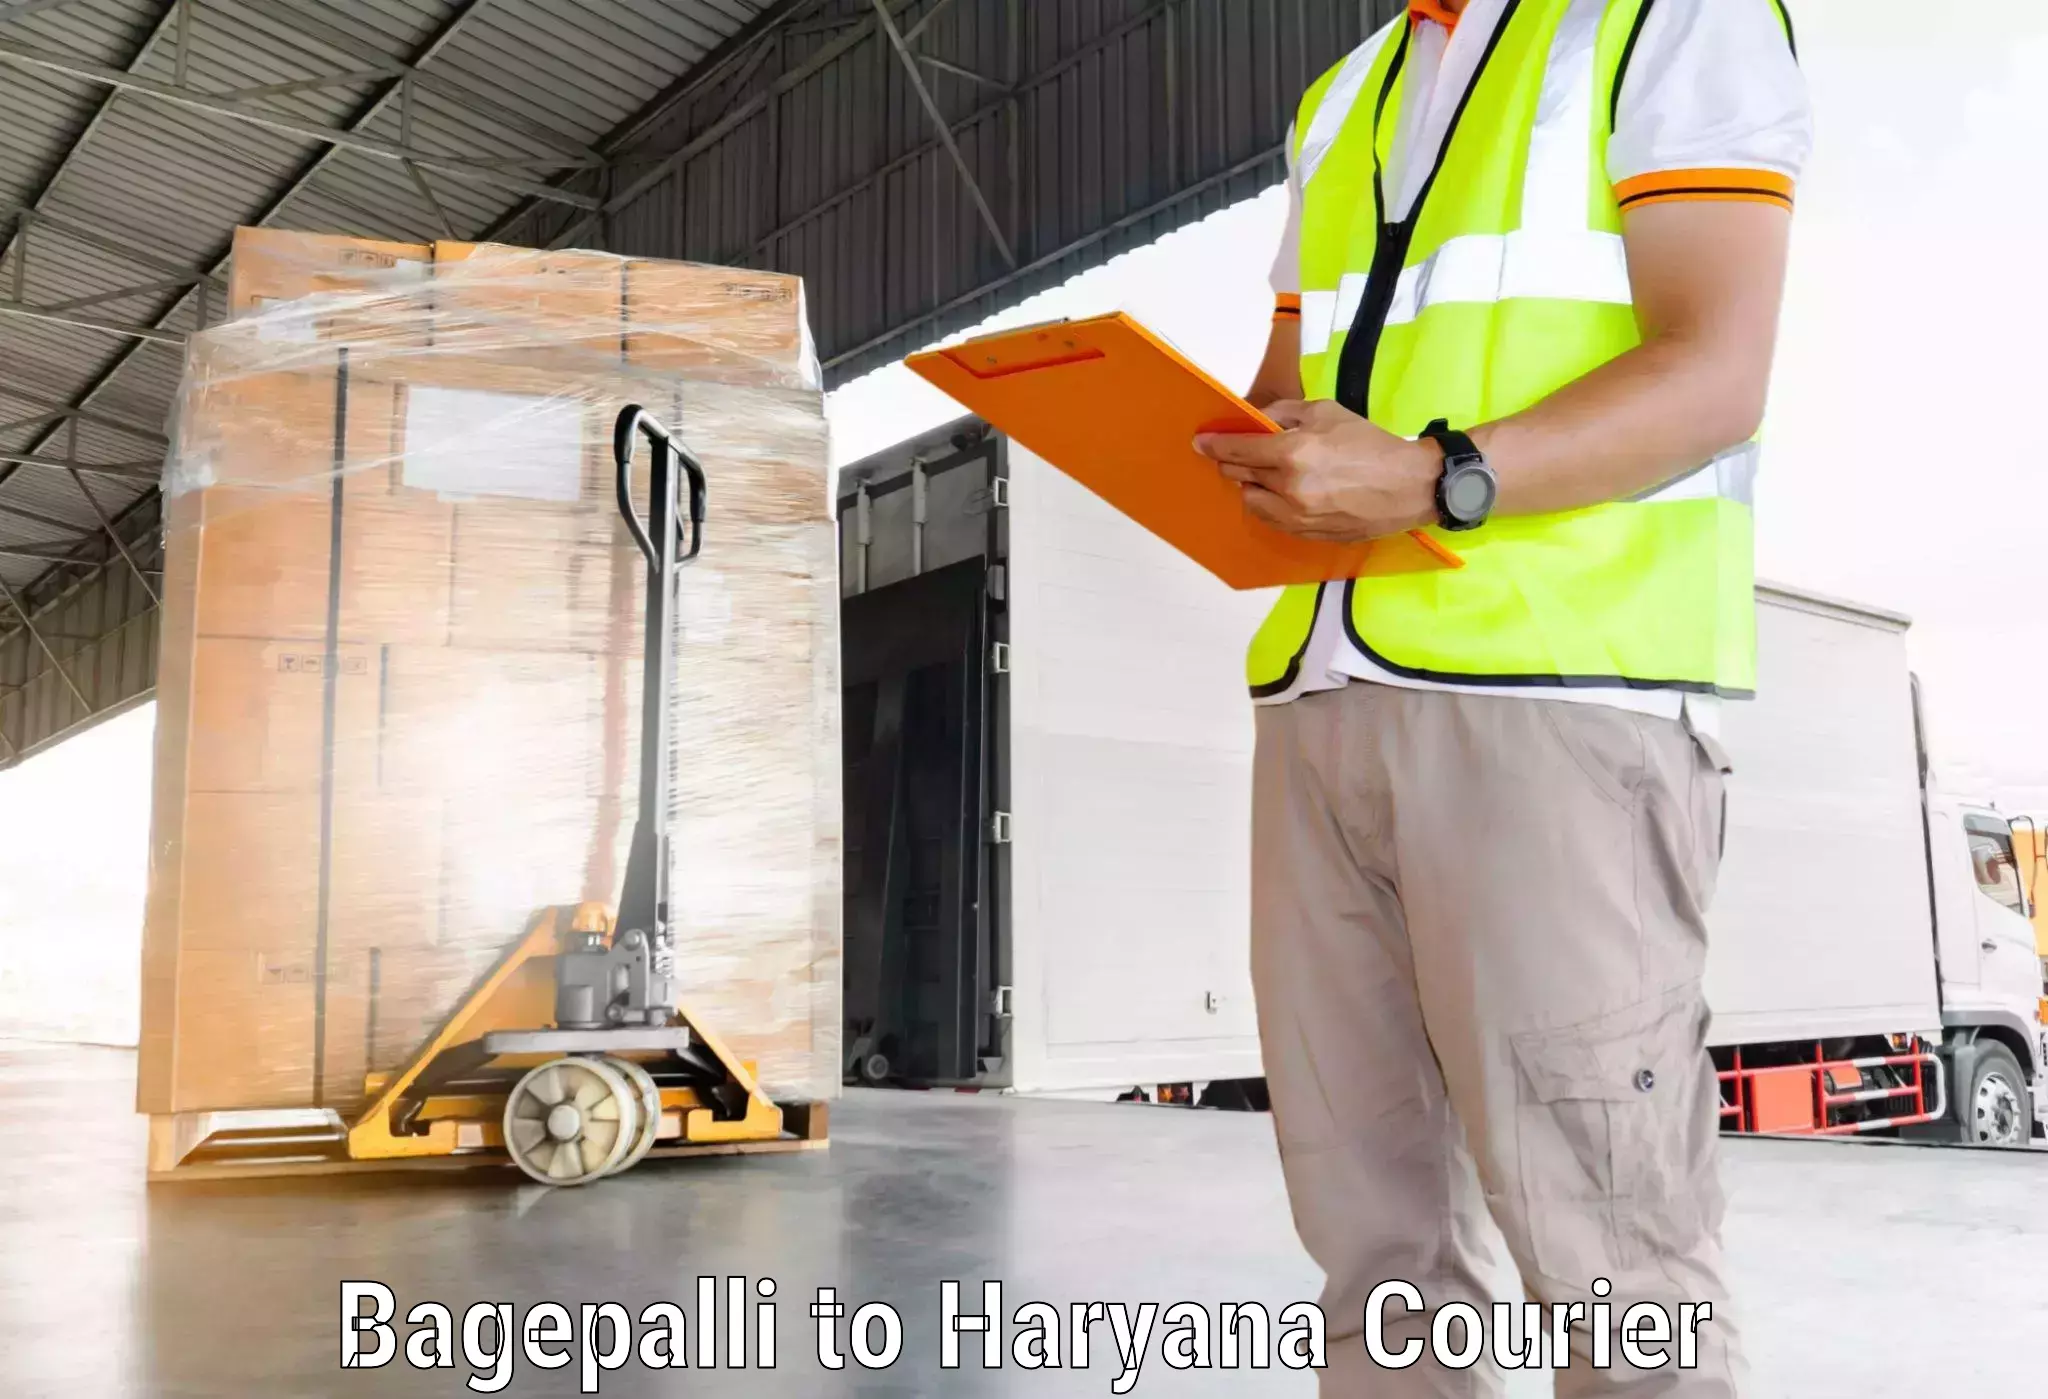 Parcel service for businesses Bagepalli to Gurgaon